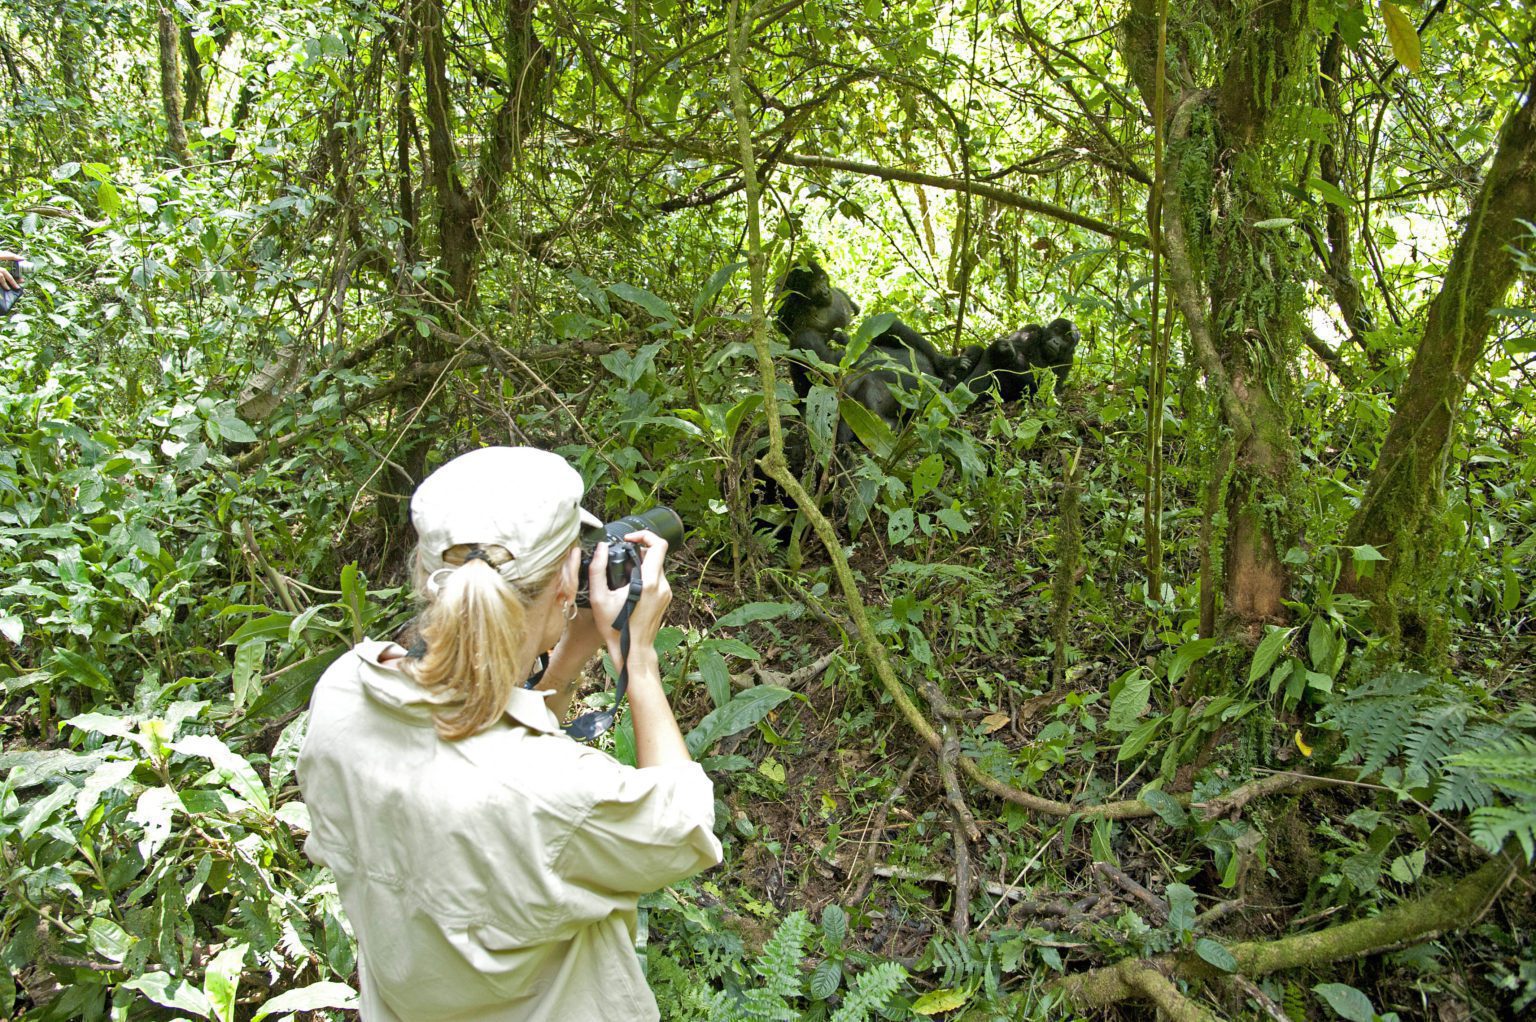 woman in a hat taking a photo of a gorilla in the forest